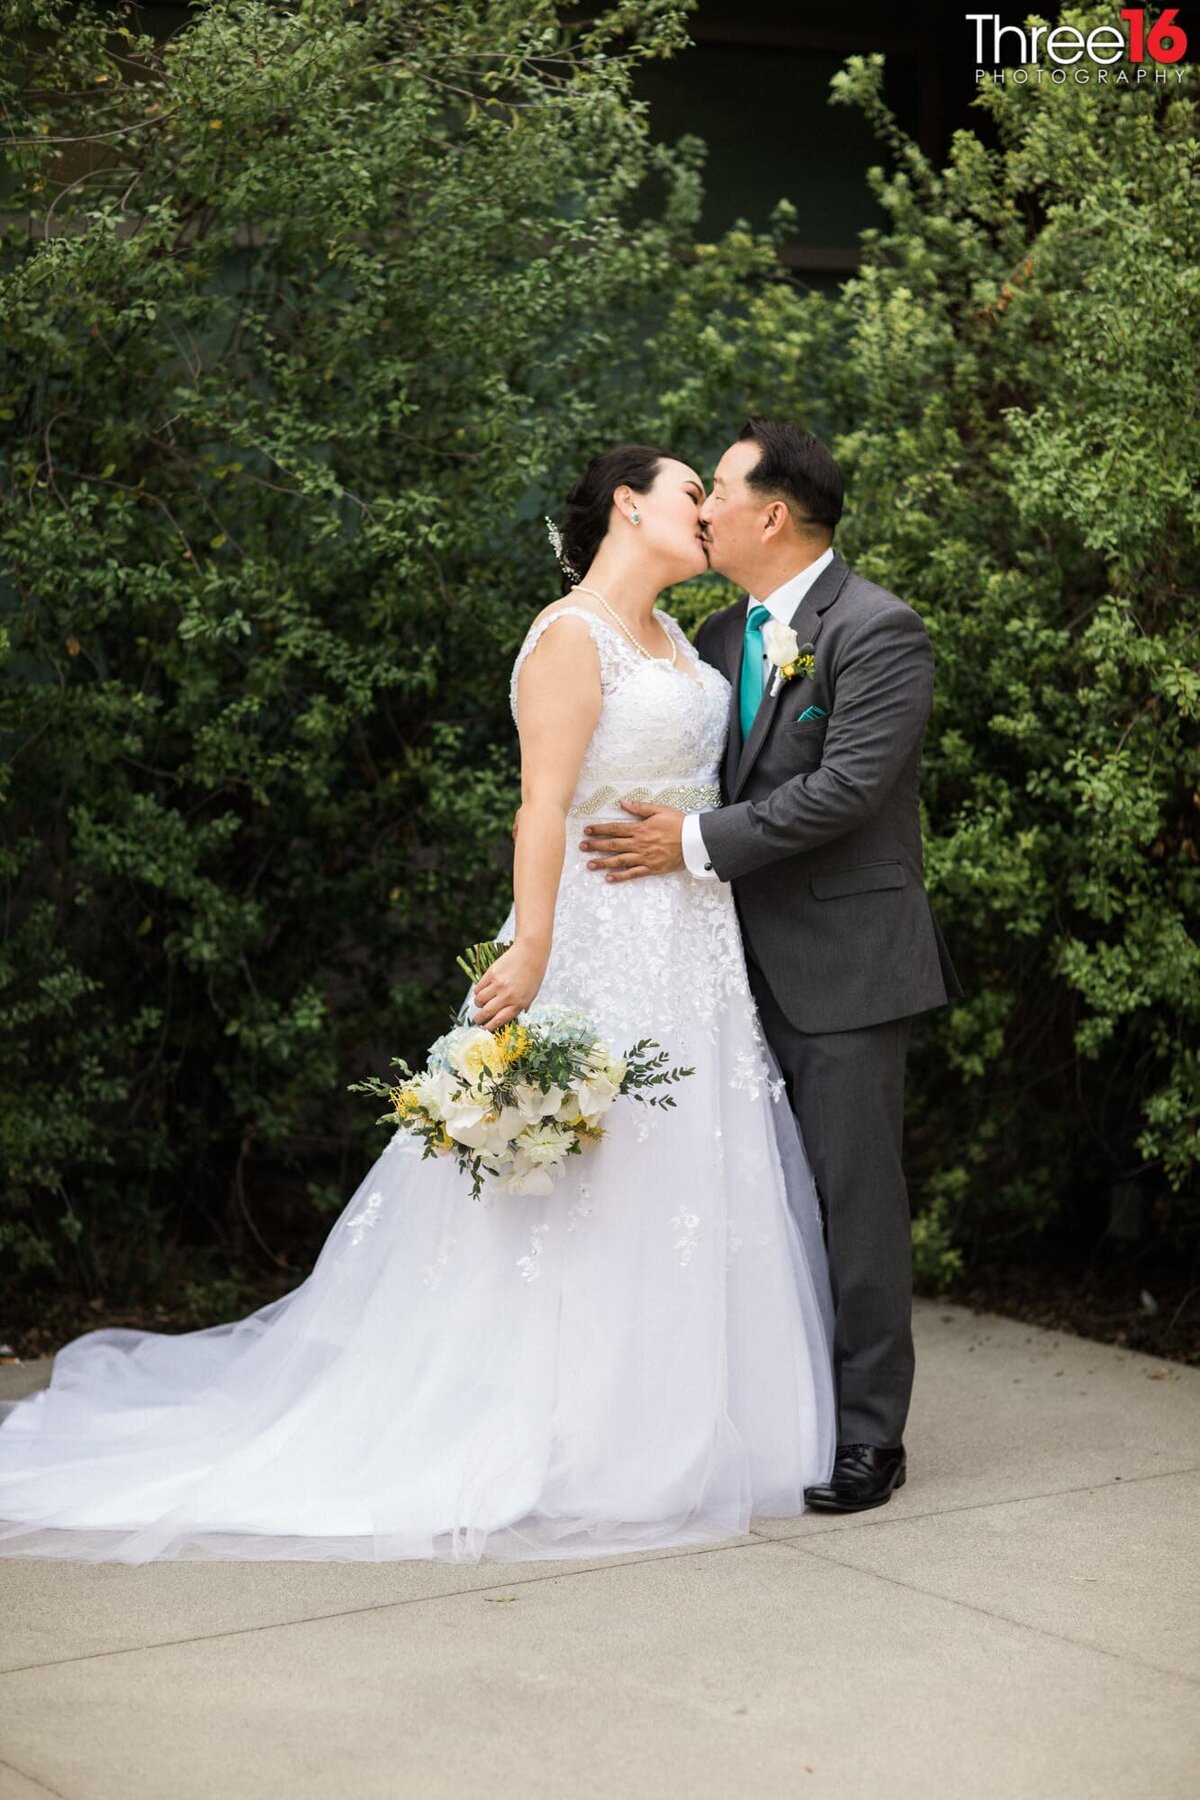 Bride and Groom share a sweet kiss during their photo session